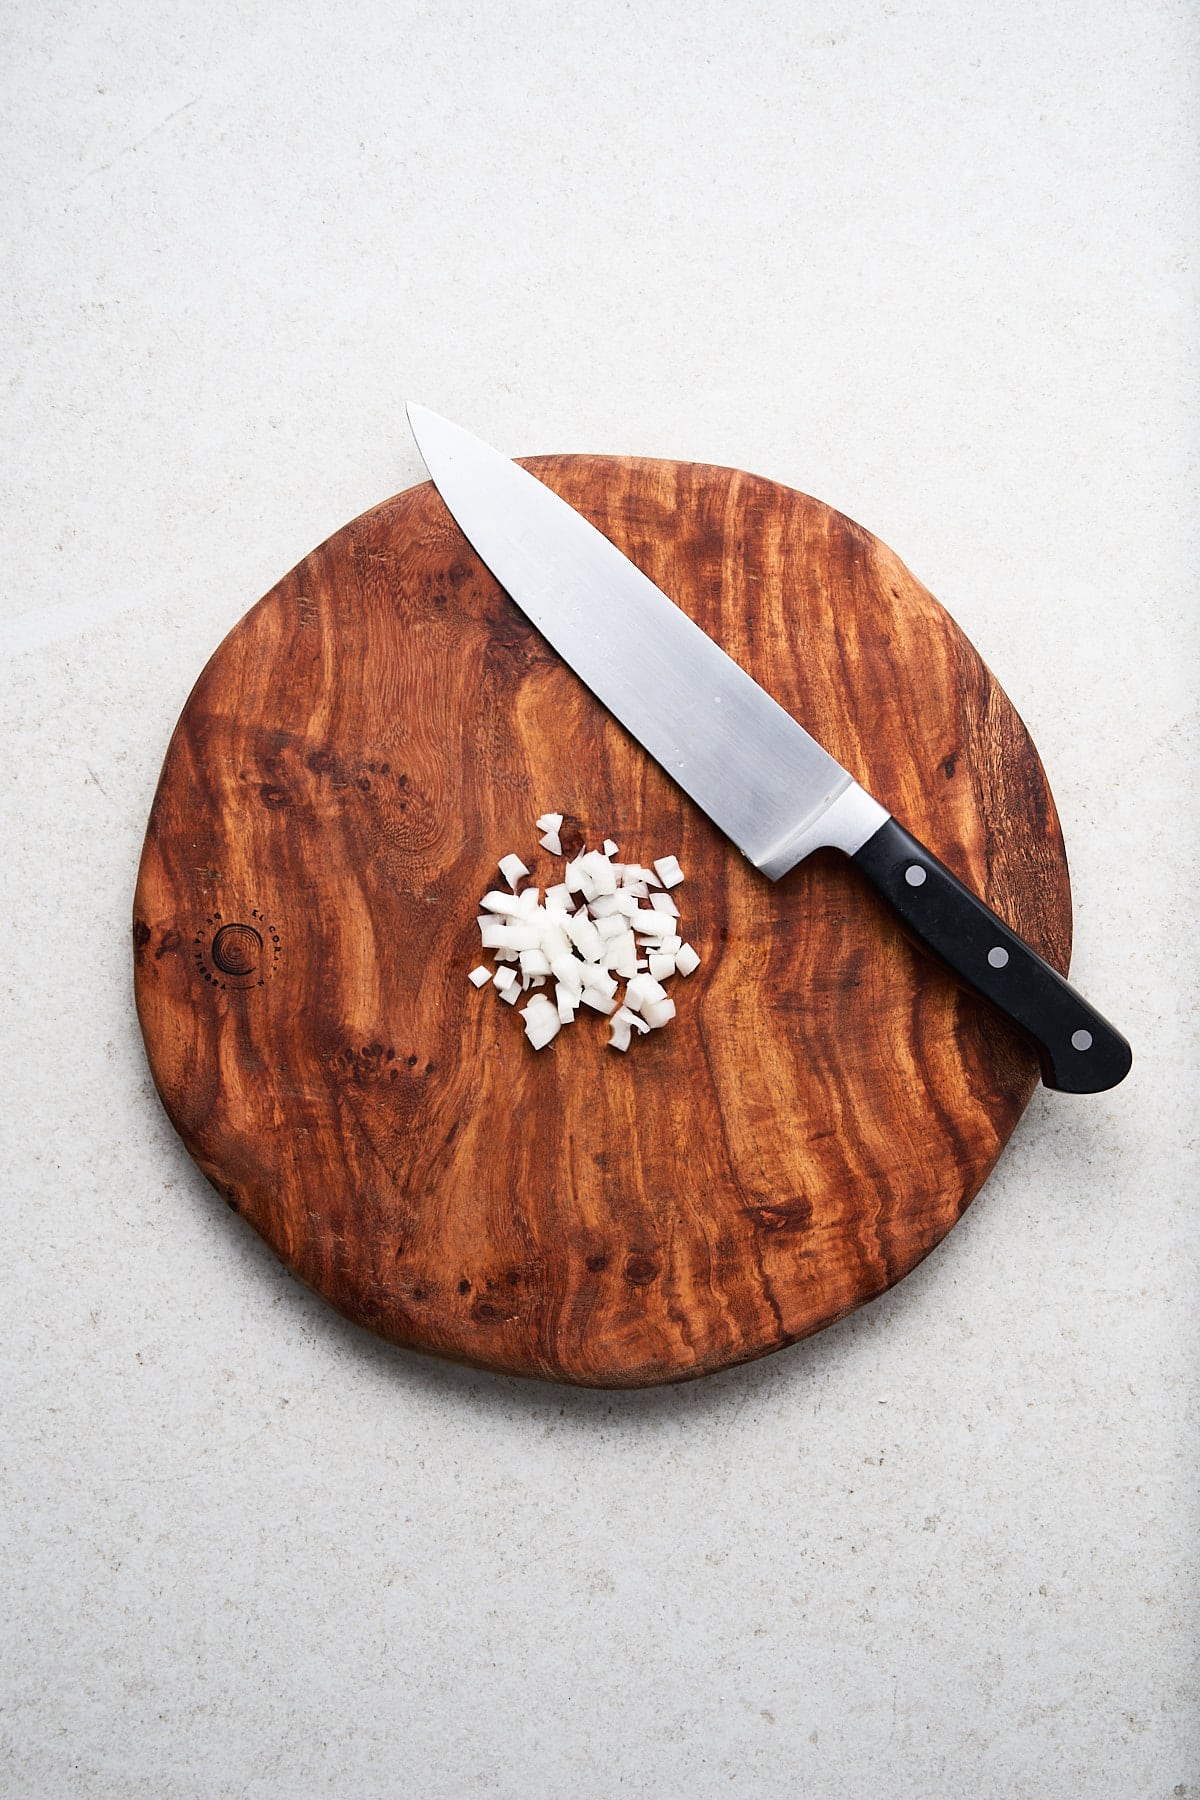 Diced spring onion on a cutting block